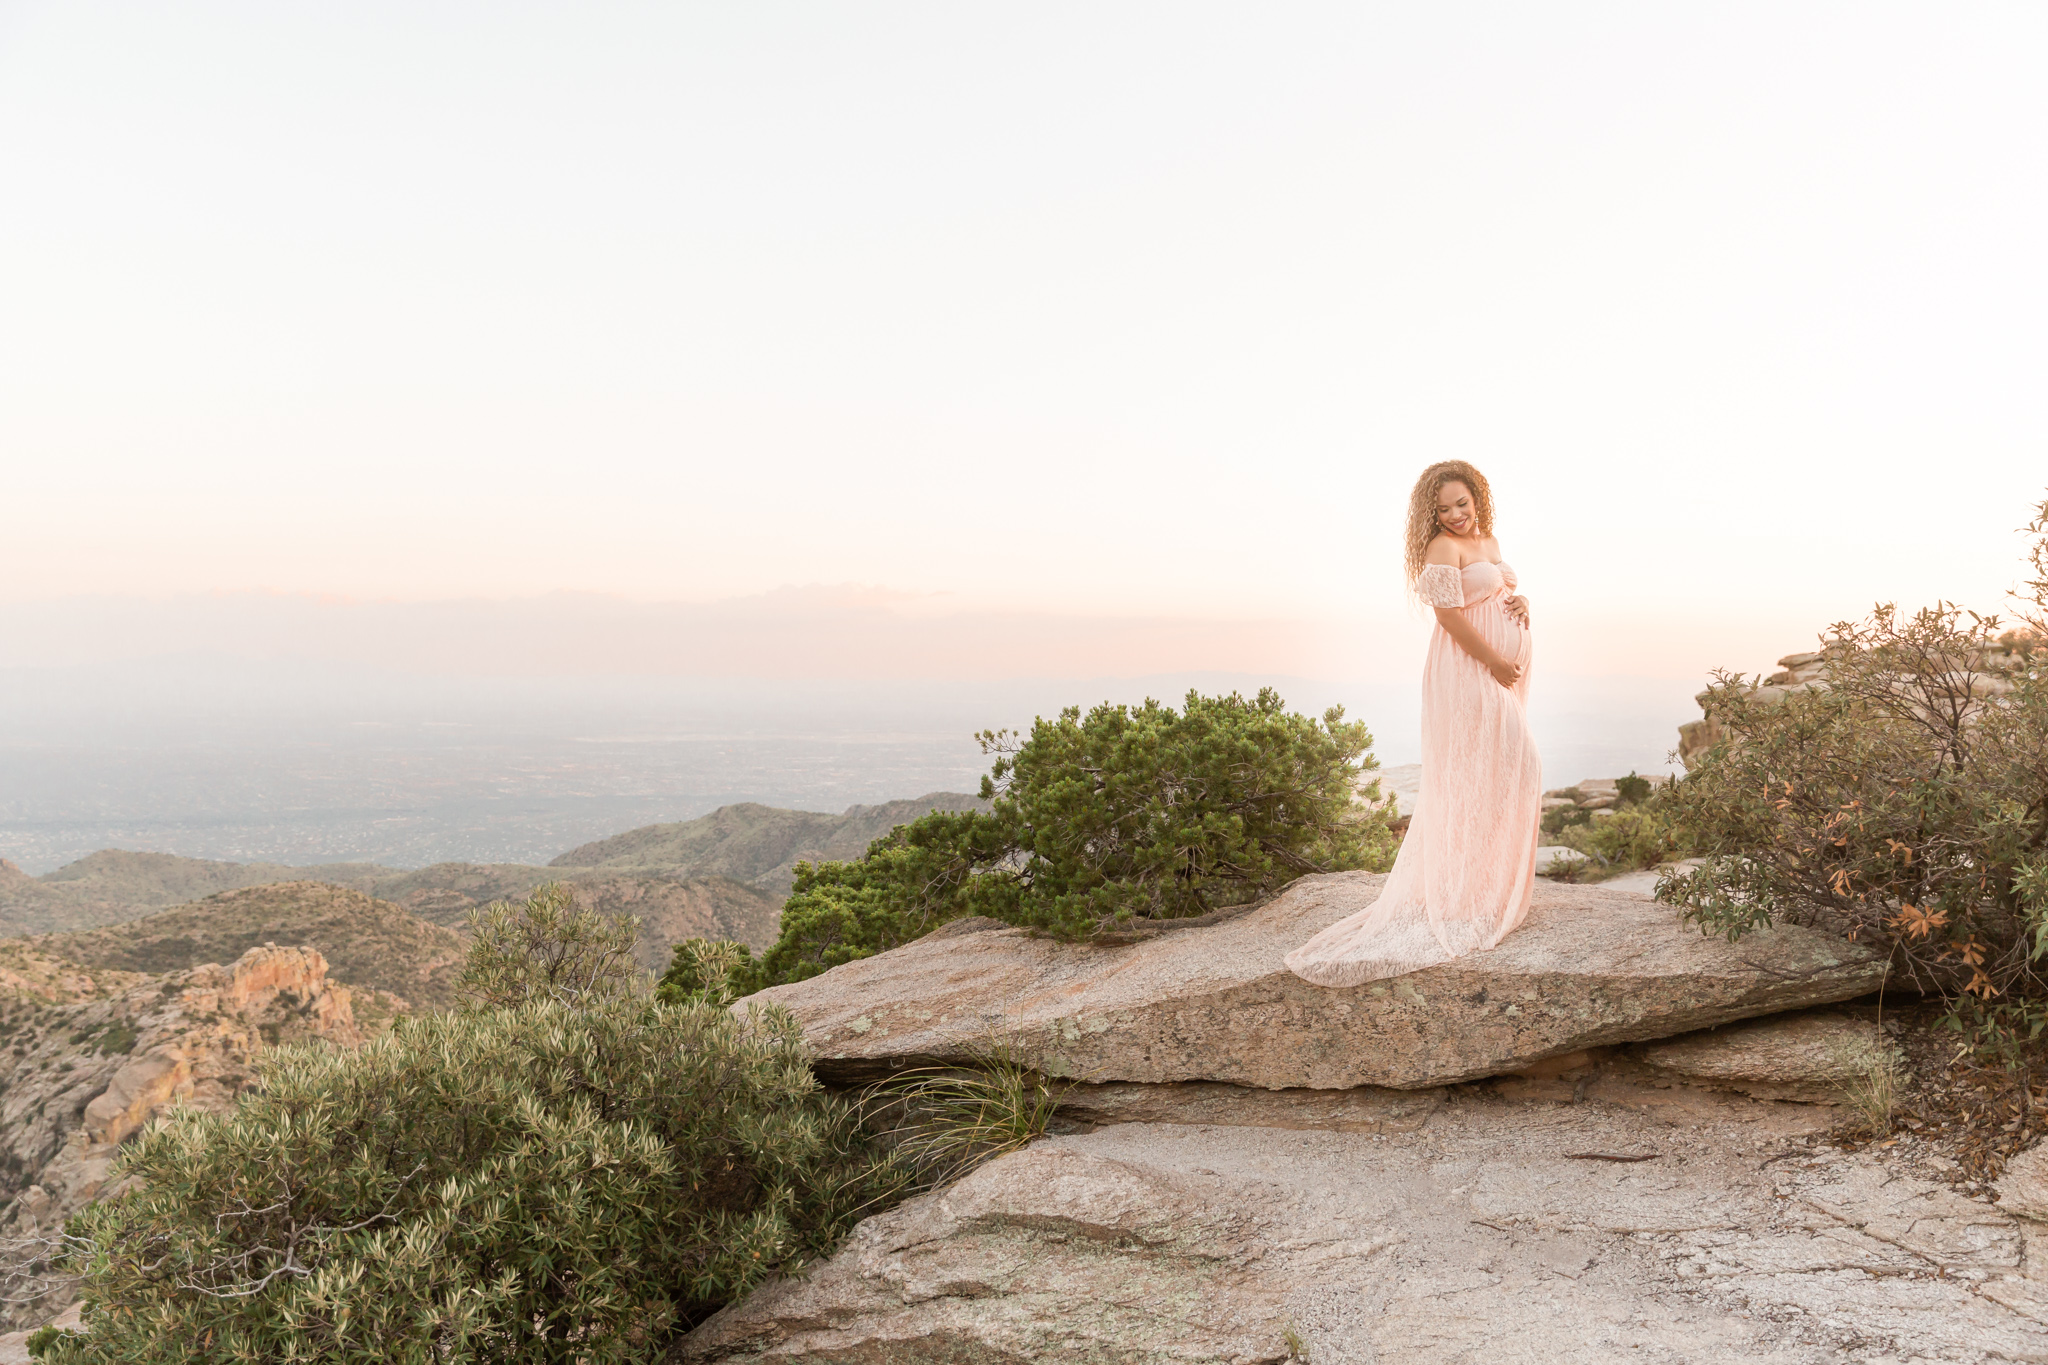 Maternity session in Tucson Arizona at Mount Lemmon. Mother-to-be wearing floor length pink off the shoulder dress. Session captured by Tucson Portrait and Wedding Photographer Melissa Fritzsche Photography.